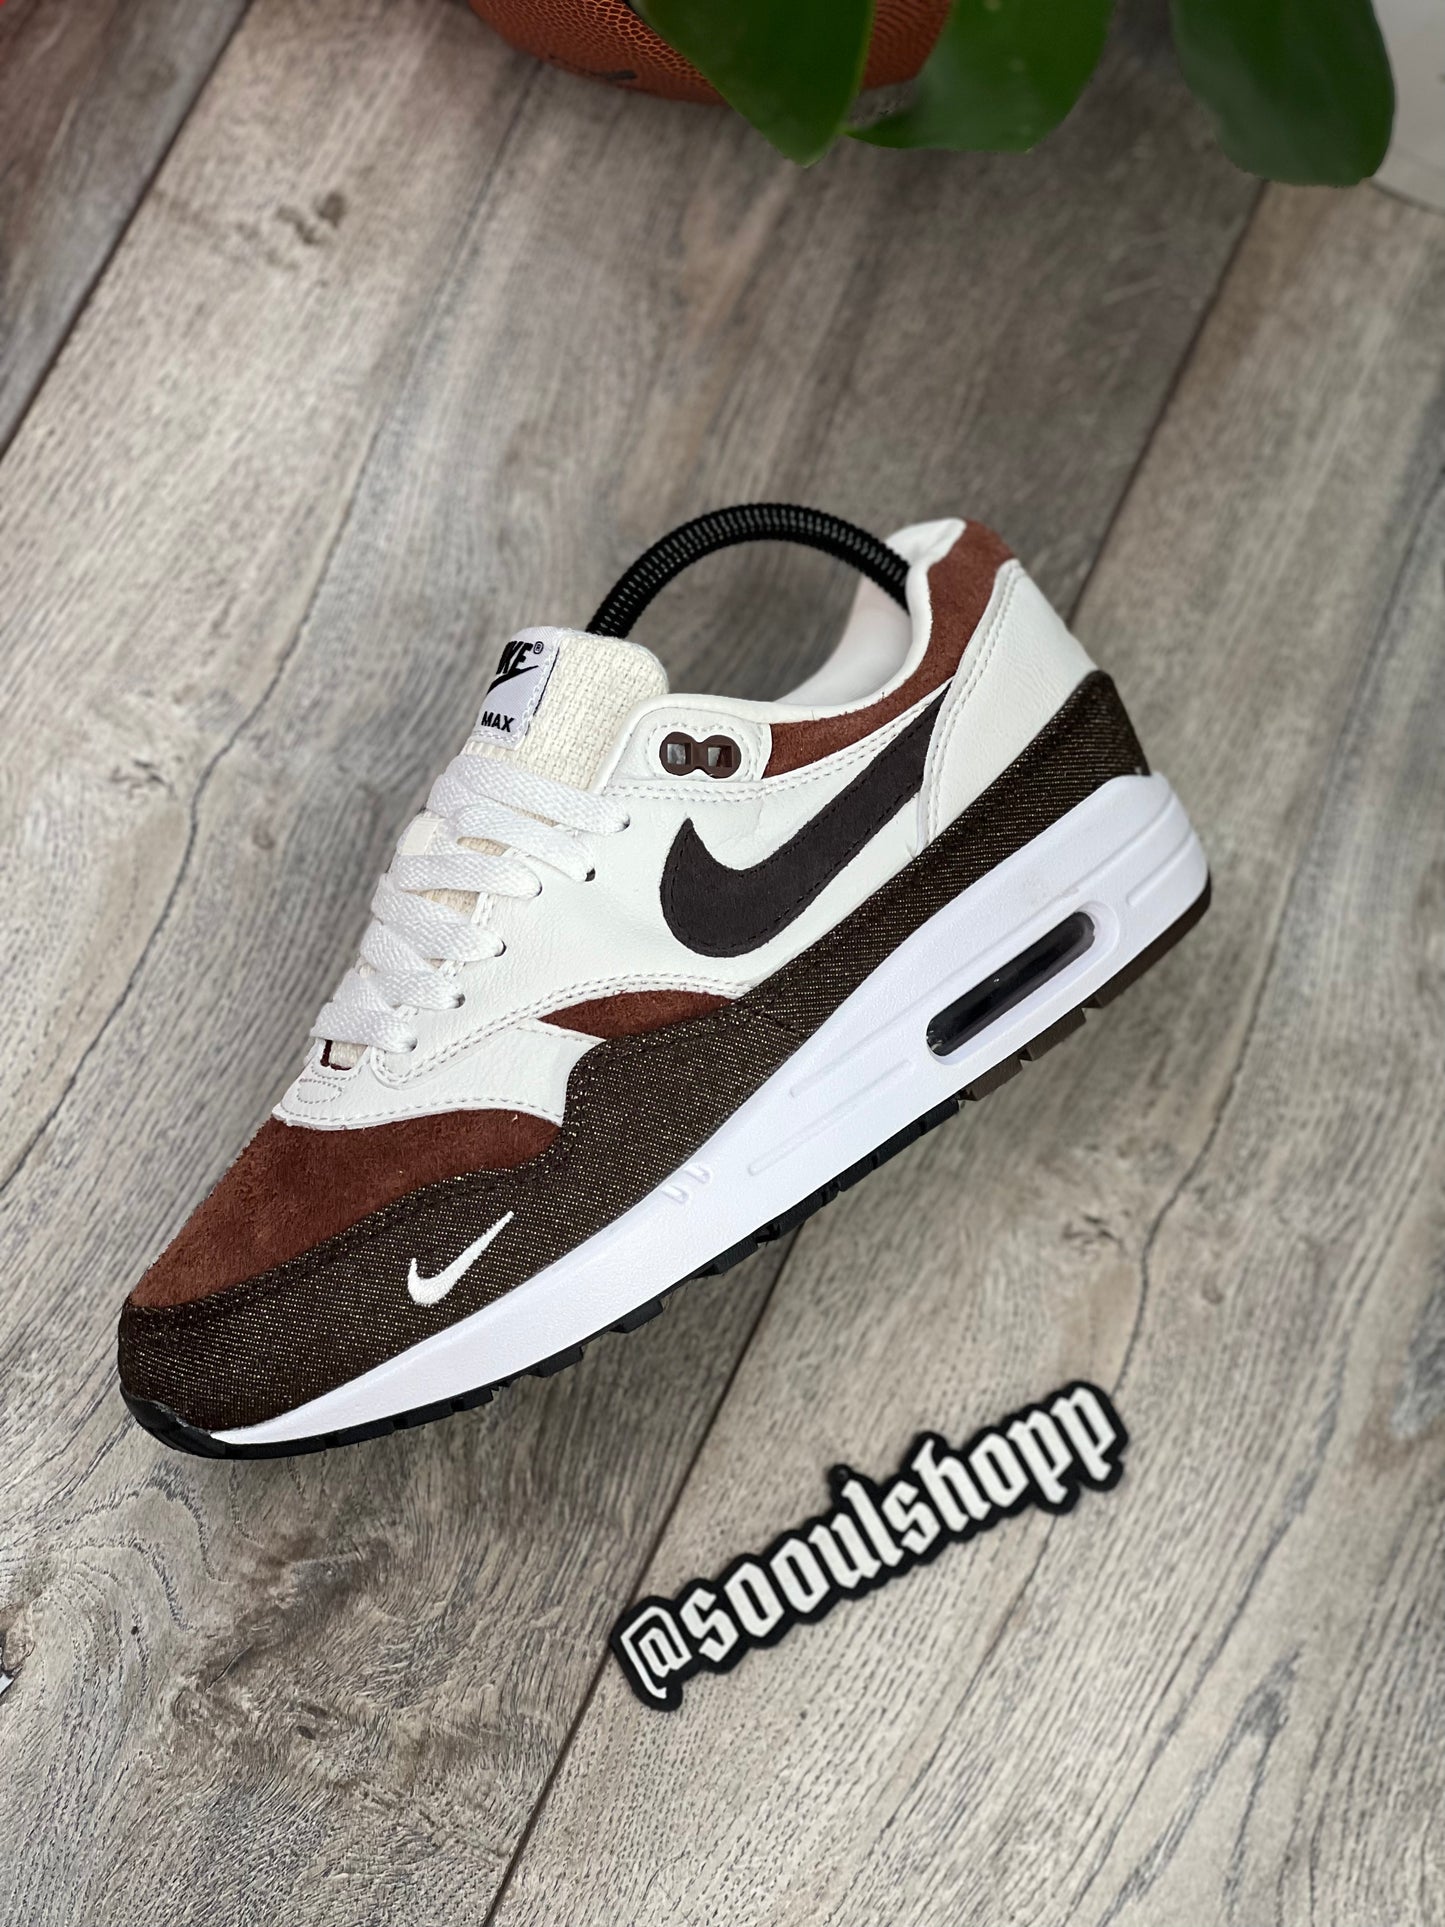 Nike Air Max 1
size? Exclusive Considered